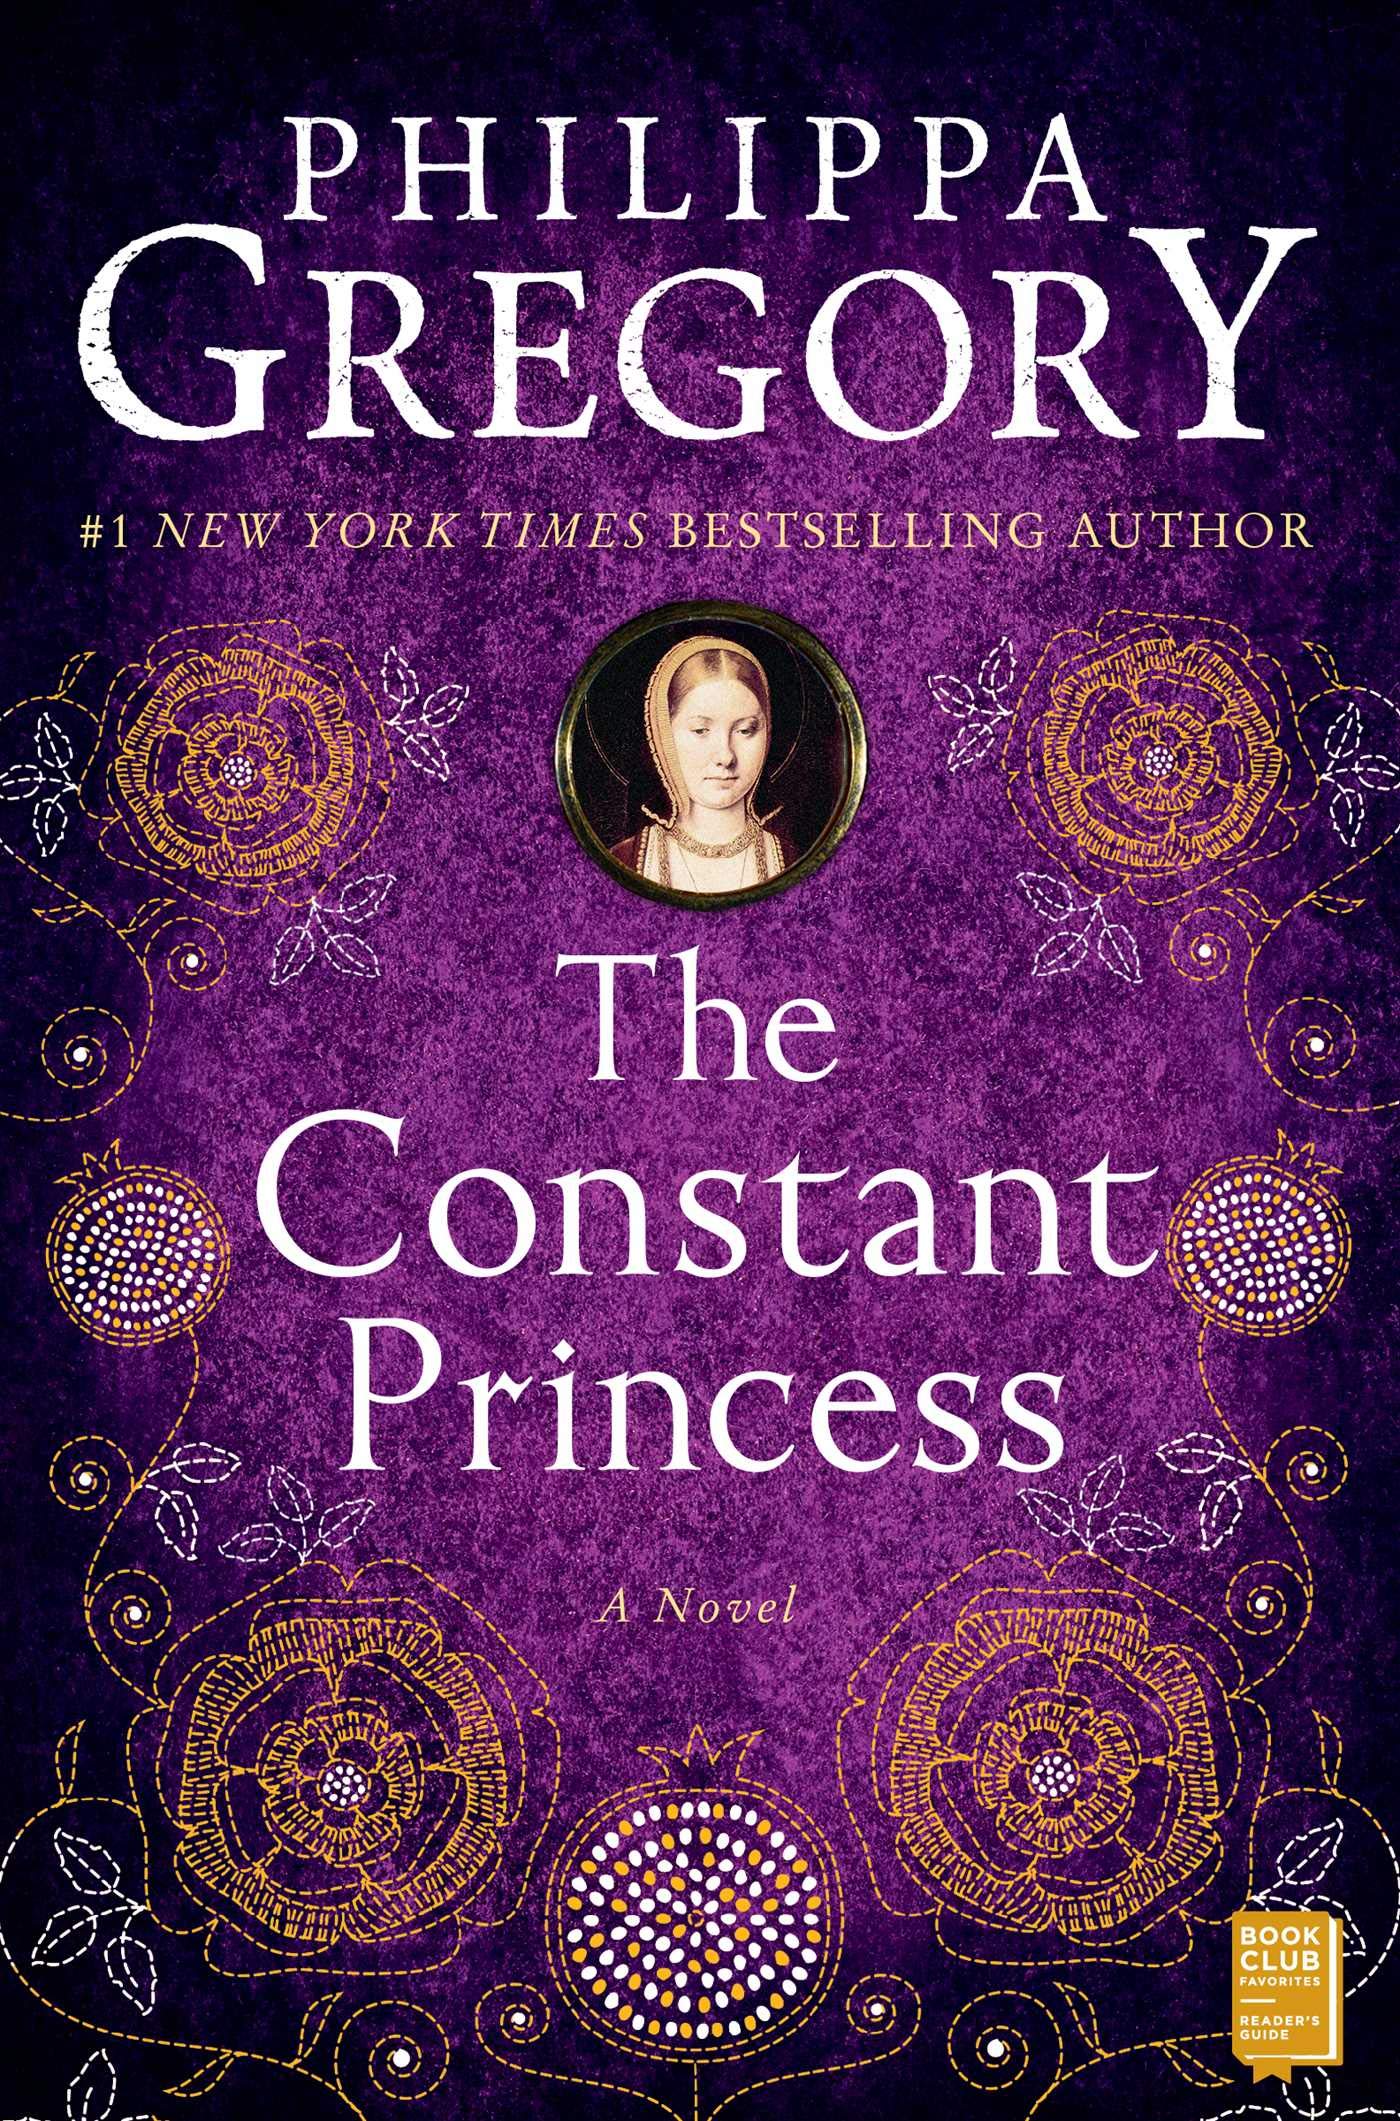 A lavish book cover for "the constant princess" by philippa gregory, showcasing intricate golden patterns and a portrait of a woman, hinting at historical and regal themes within the novel.